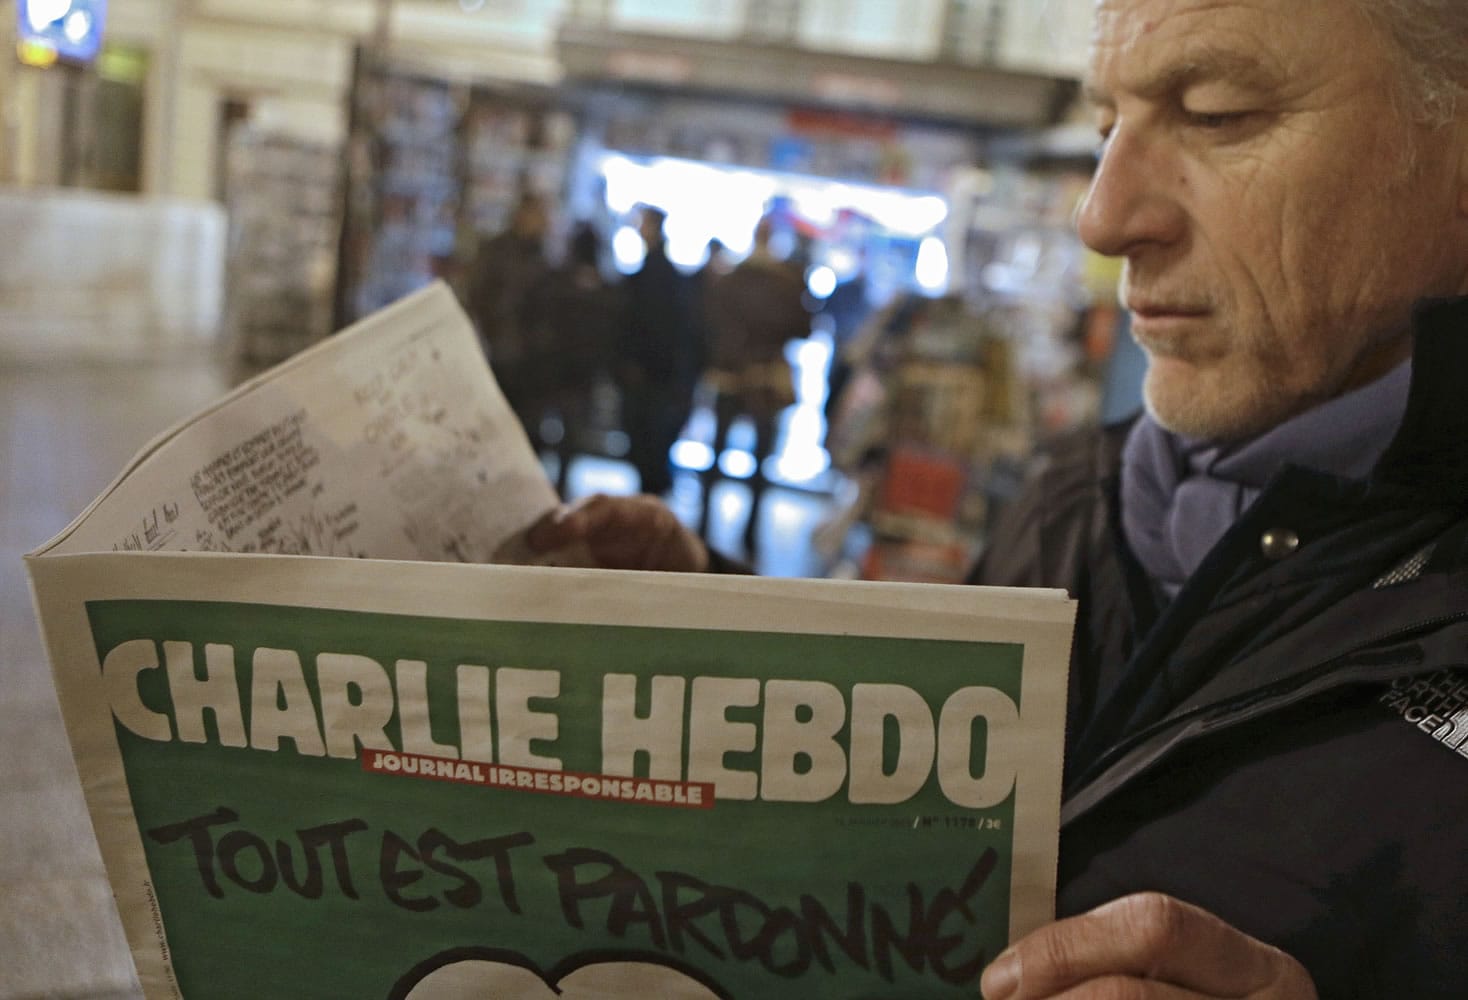 File - In this Wednesday, Jan. 14, 2015 file photo, Jean Paul Bierlein reads the latest issue of Charlie Hebdo outside a newsstand in Nice, southeastern France. When cartoonists at a French publication that had poked fun at the Prophet Muhammad were shot dead, millions around the world felt it as an attack on freedom of speech. Since the rampage, French authorities have arrested dozens of people _ including a comedian _ for appearing to praise the terrorists or encourage more attacks.